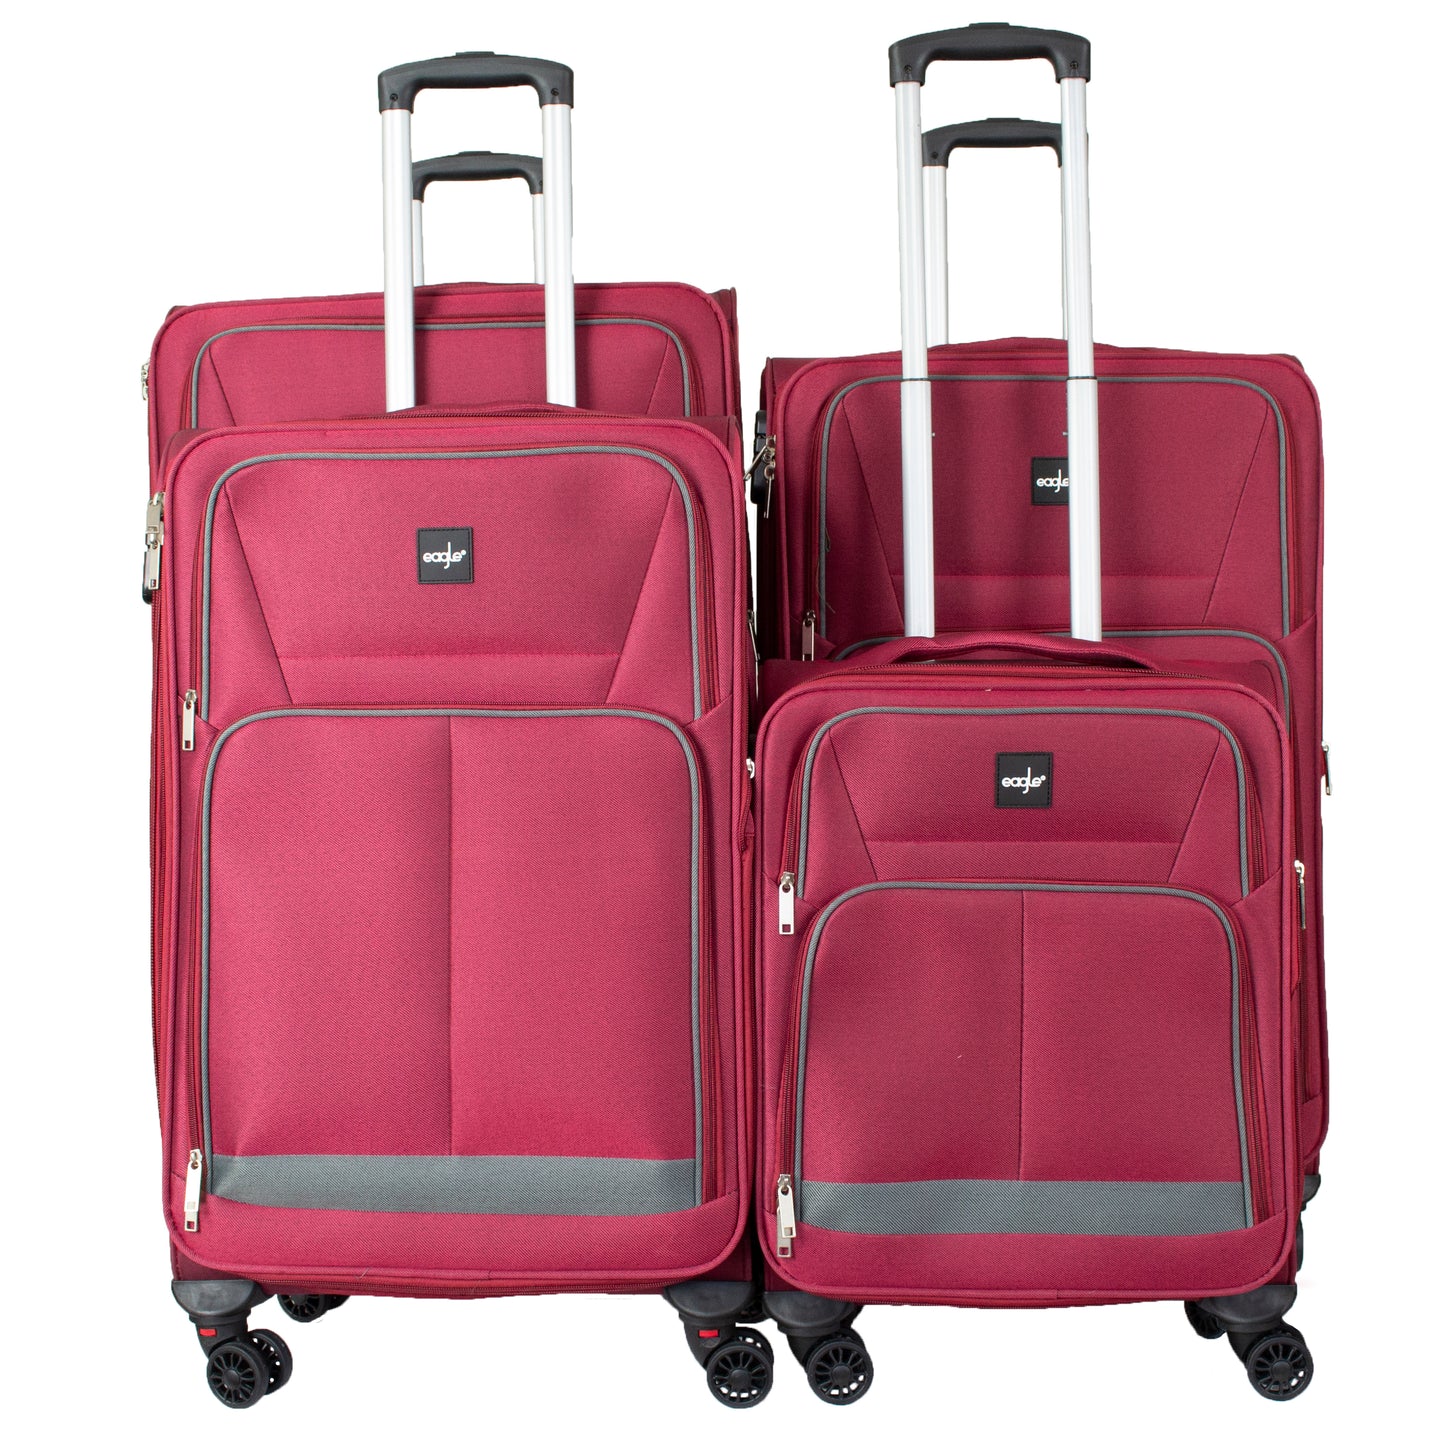 4 Wheels Soft Case Luggage Red